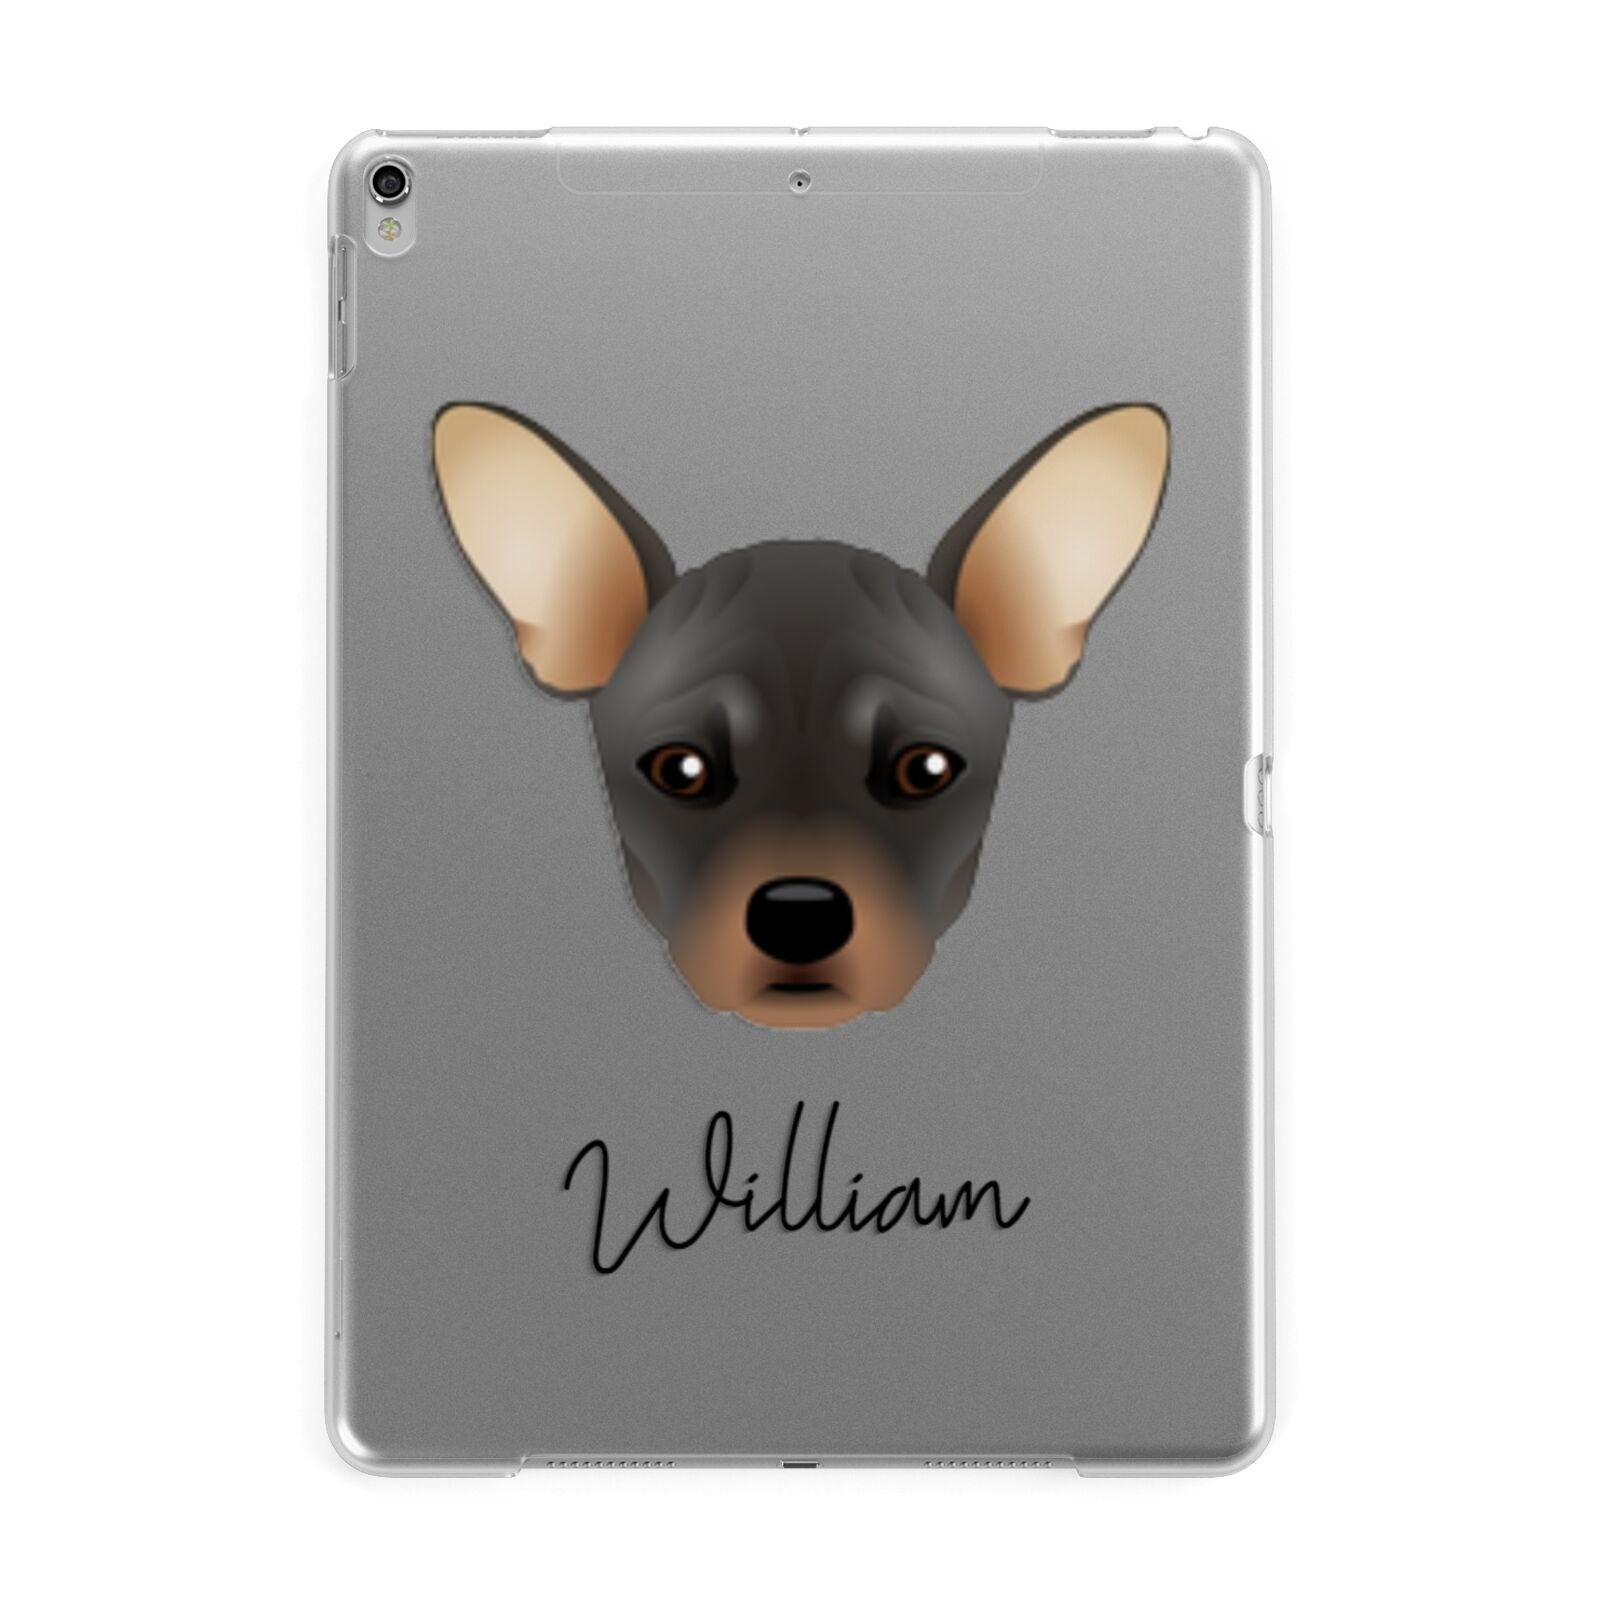 French Pin Personalised Apple iPad Silver Case